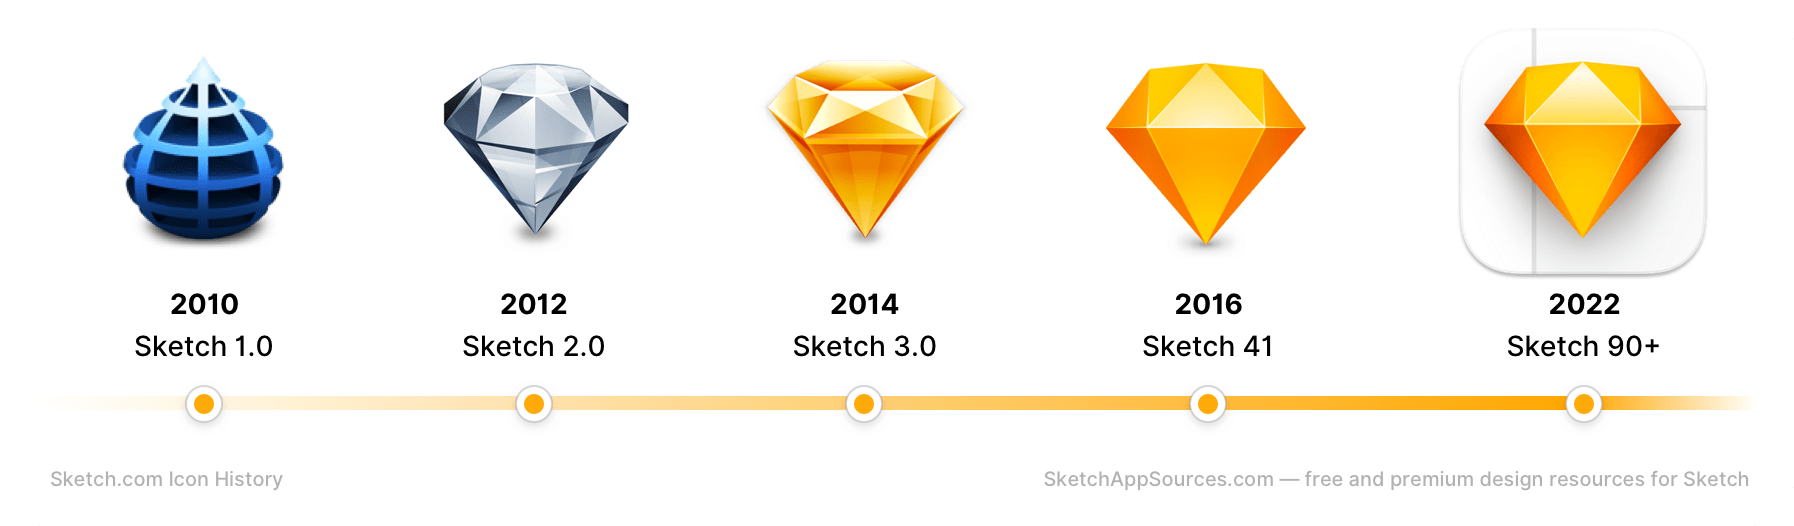 Sketch Me! on the App Store